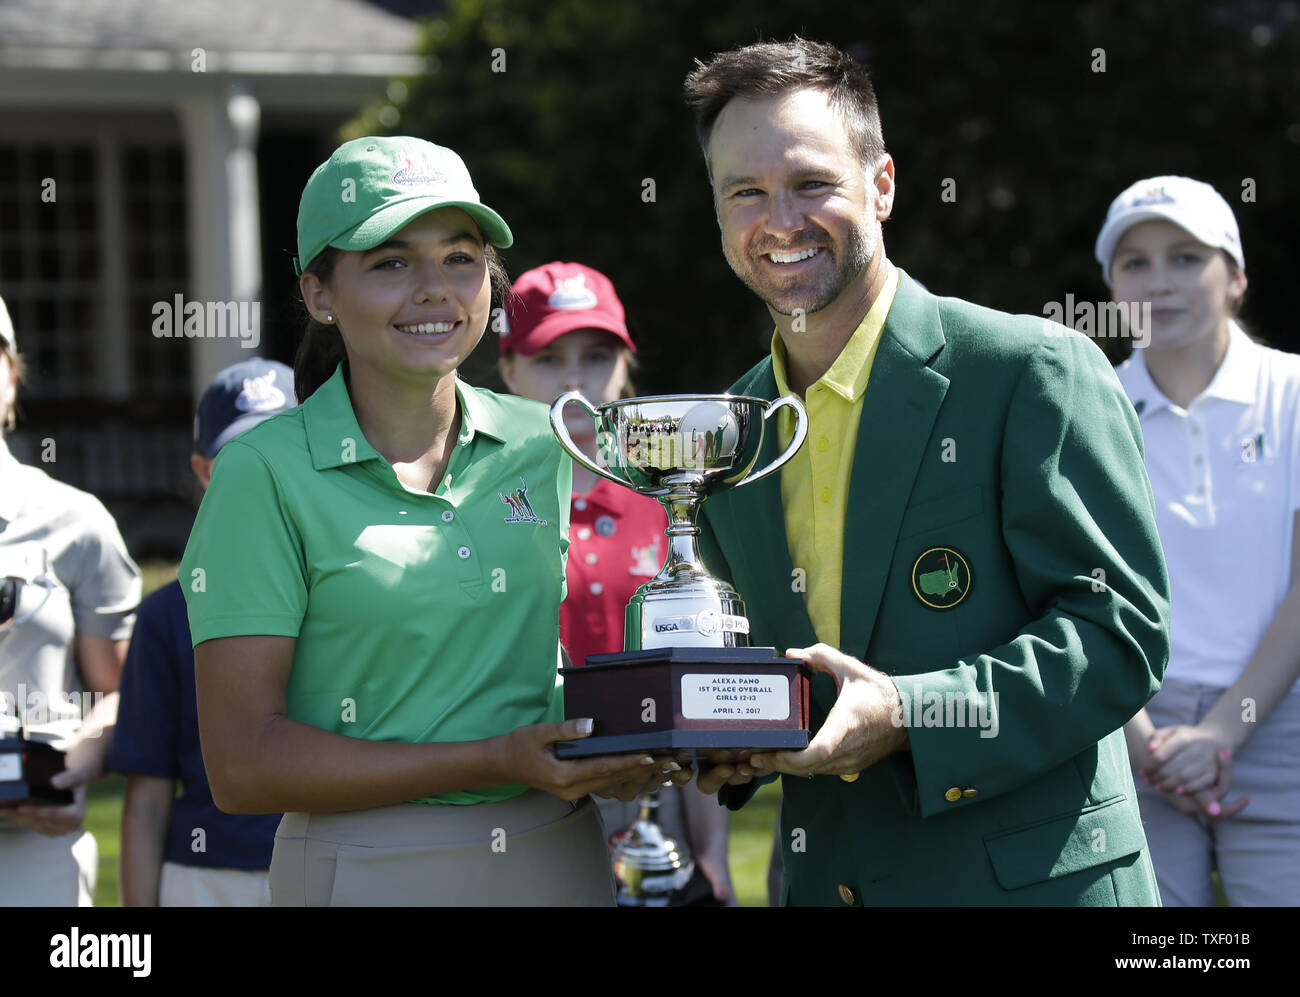 Past Masters champion Trevor Immelman stands with Alexa Pano who wins the  overall in the Drive, Chip & Putt Championship for Girls age 12-13 at the  2017 Masters Tournament at Augusta National